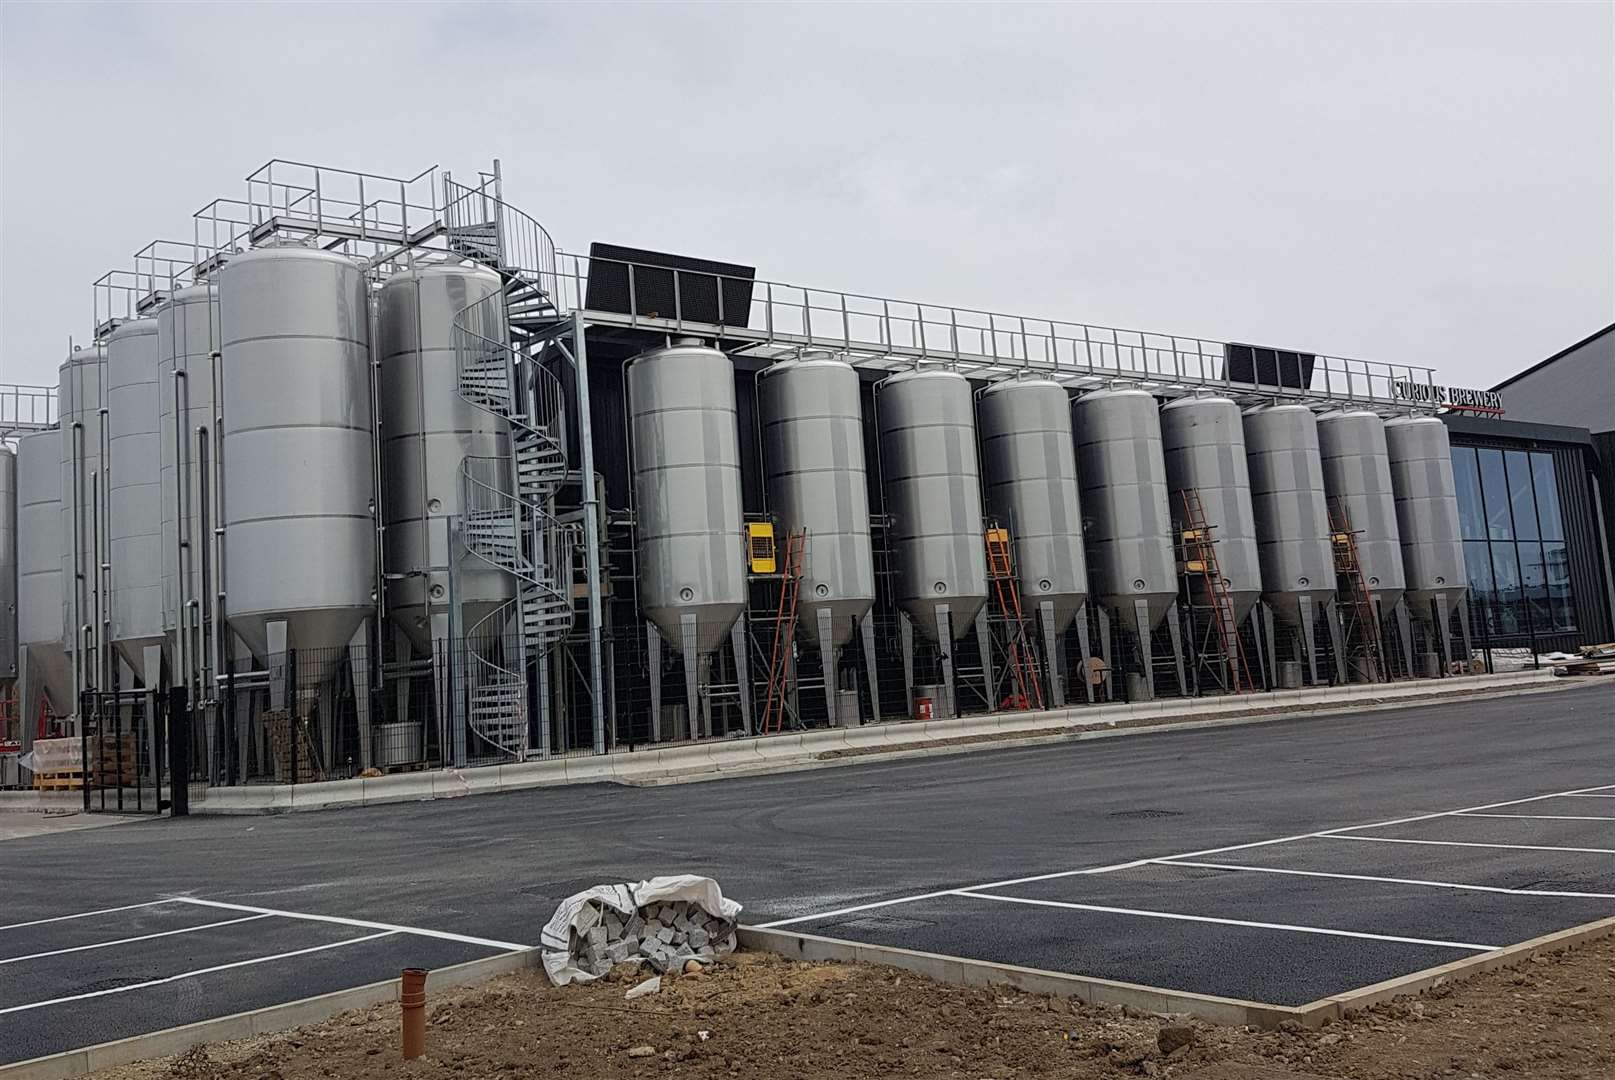 All of the giant brewing vats have been installed